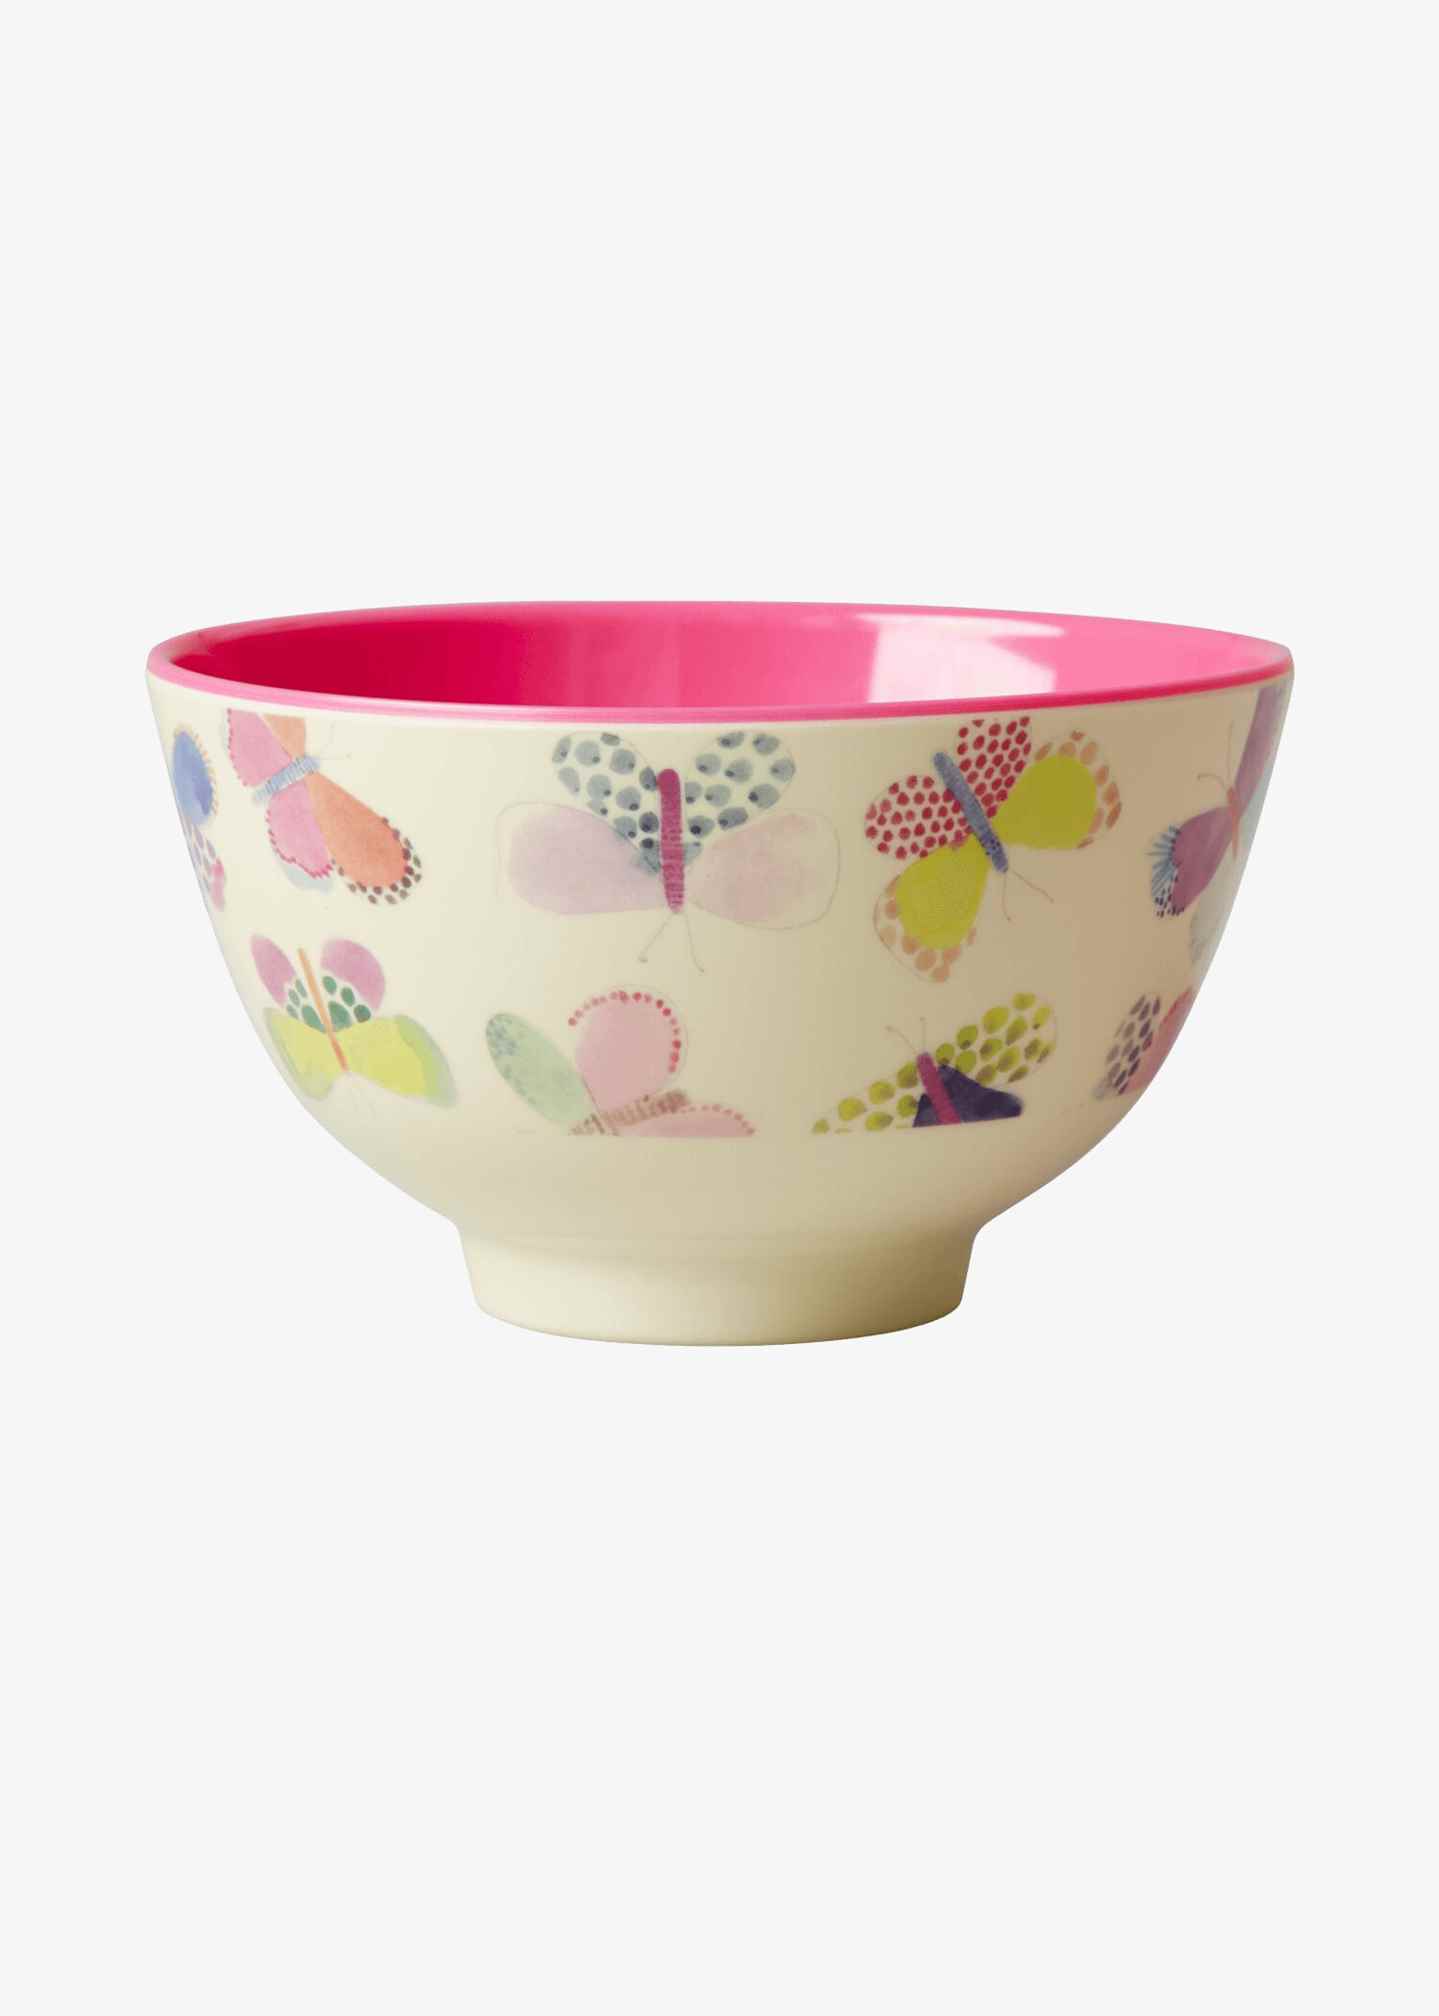 SMALL MELAMINE BOWL - SMALL FLOWERS AND CHERRY PRINT